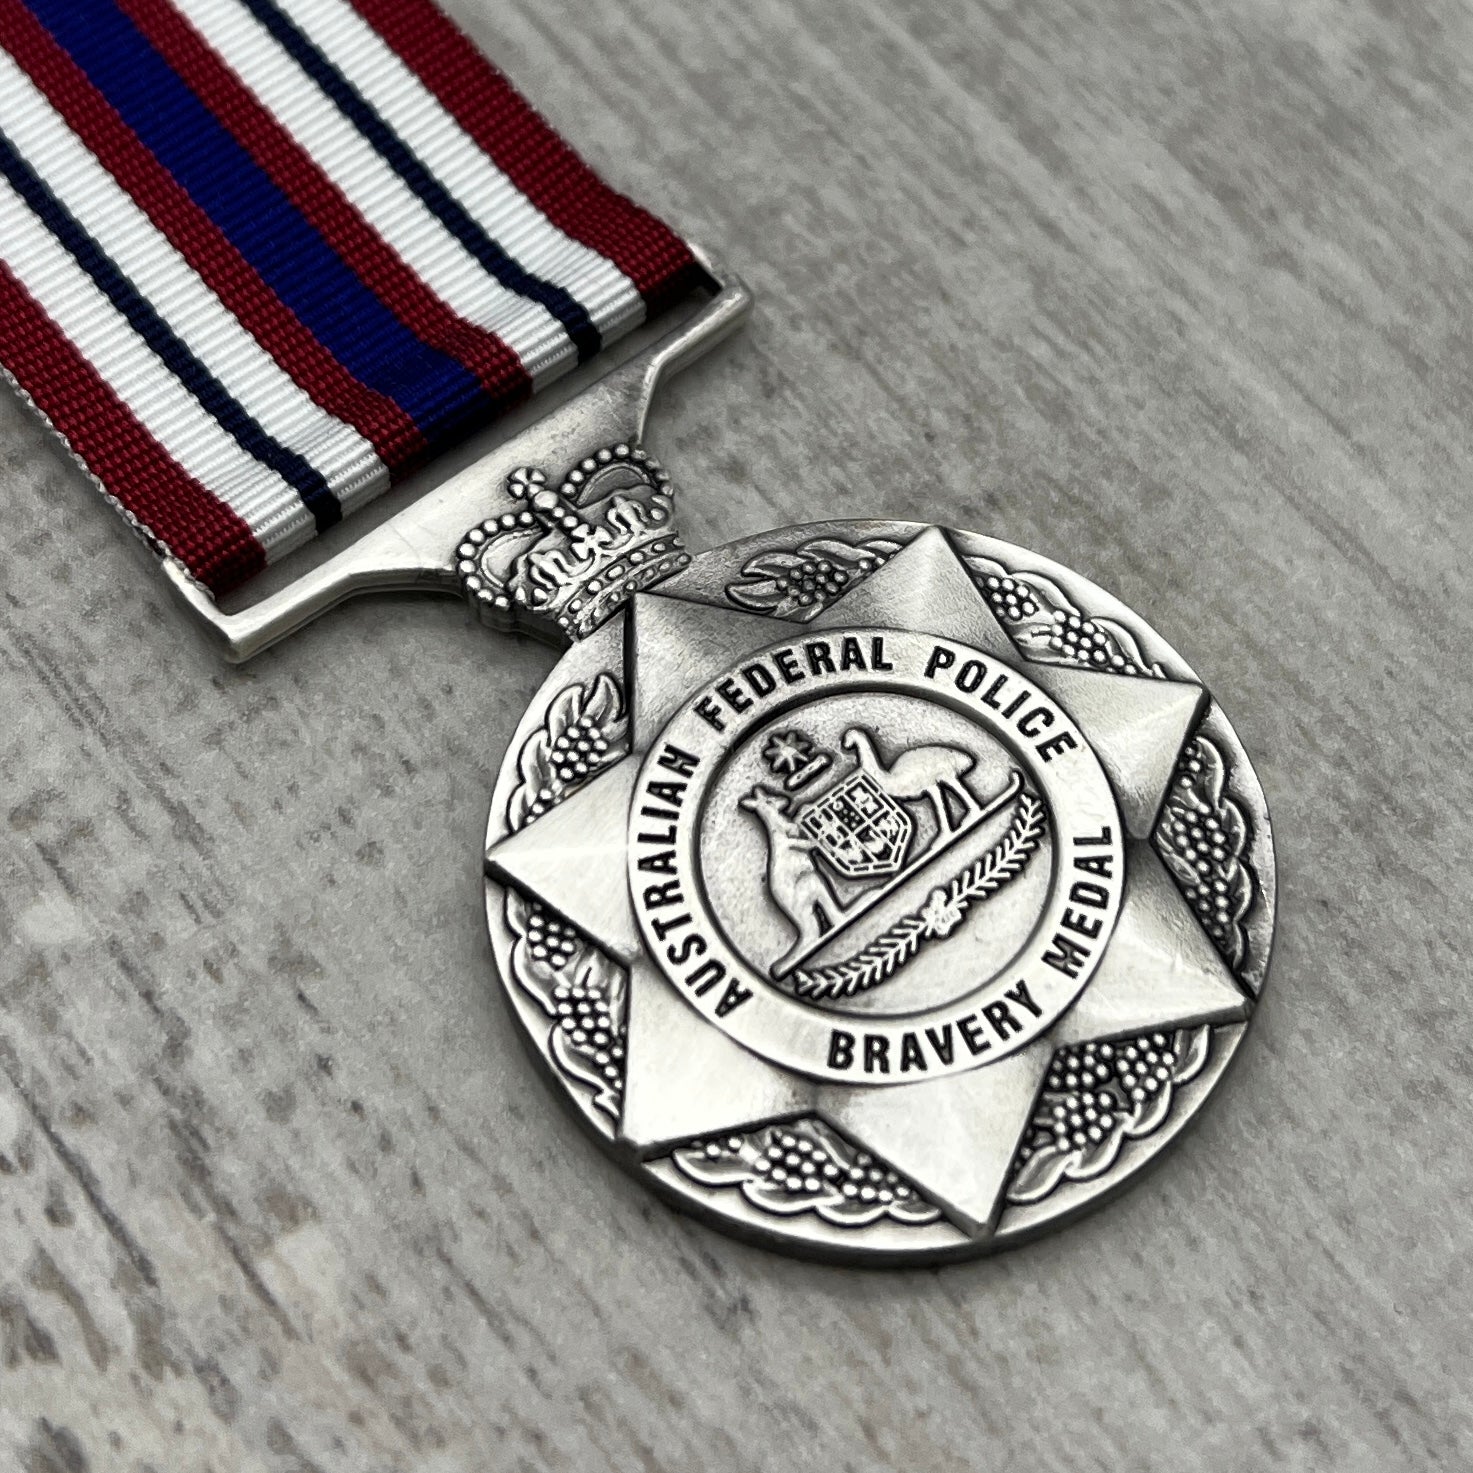 Australian Federal Police - Bravery Medal - Foxhole Medals